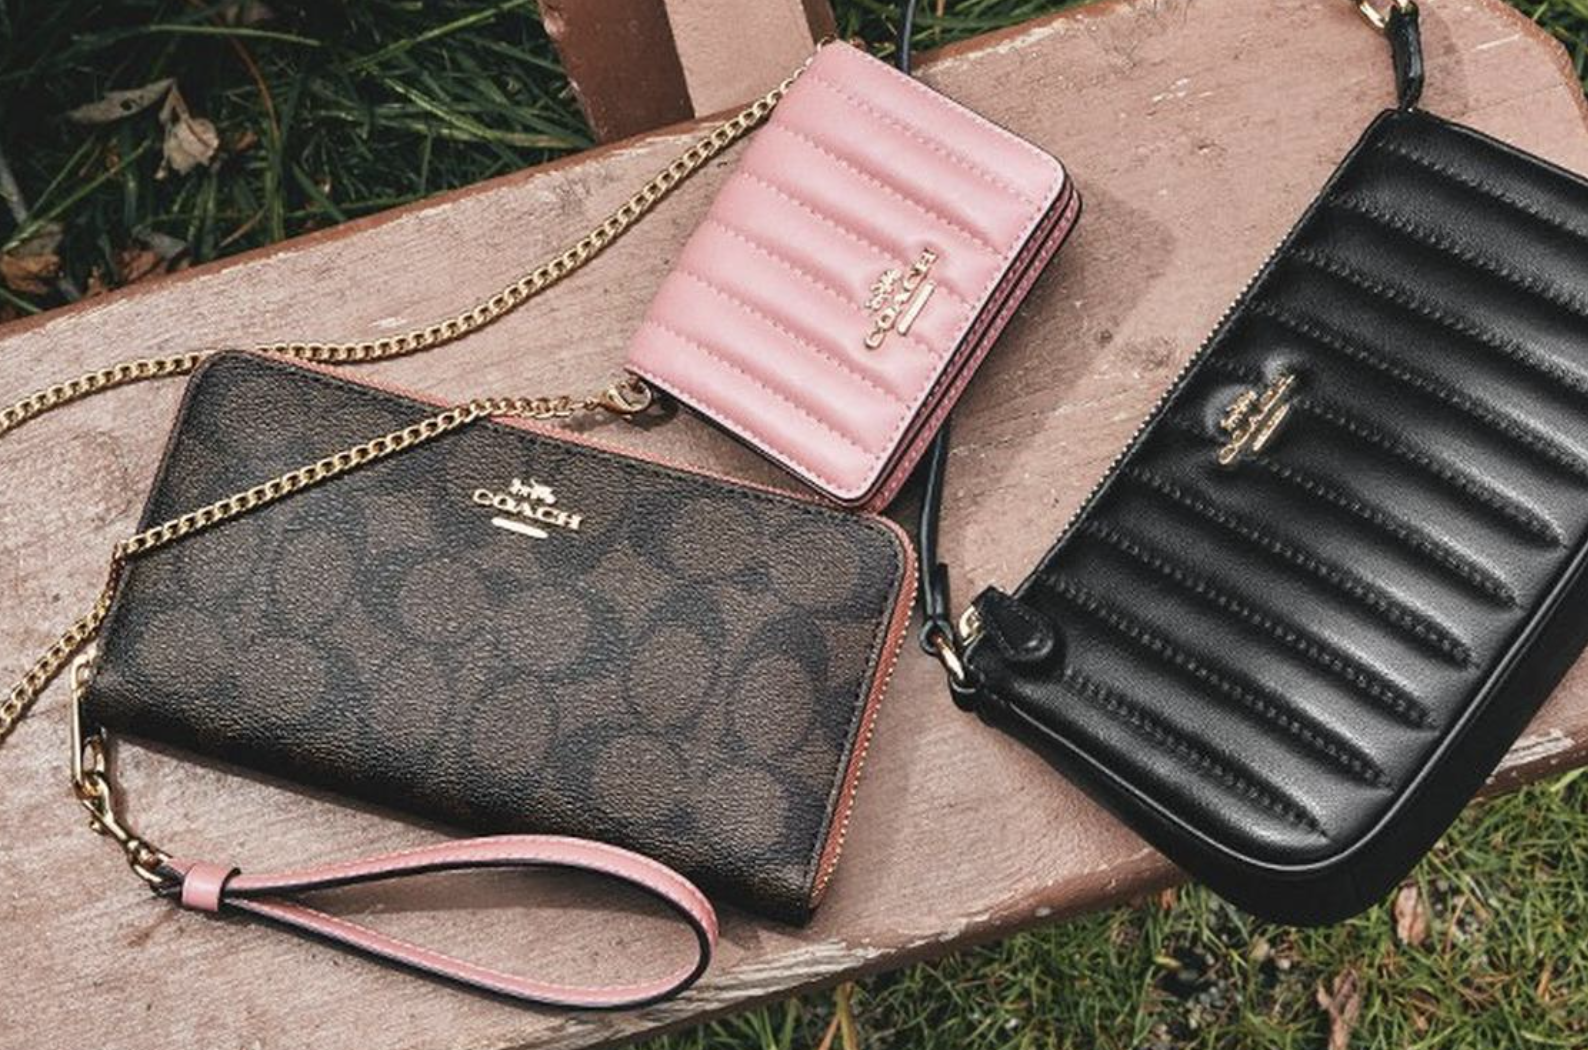 Bags, purses, wallets on sale - up to 70% off at Coach Outlet for